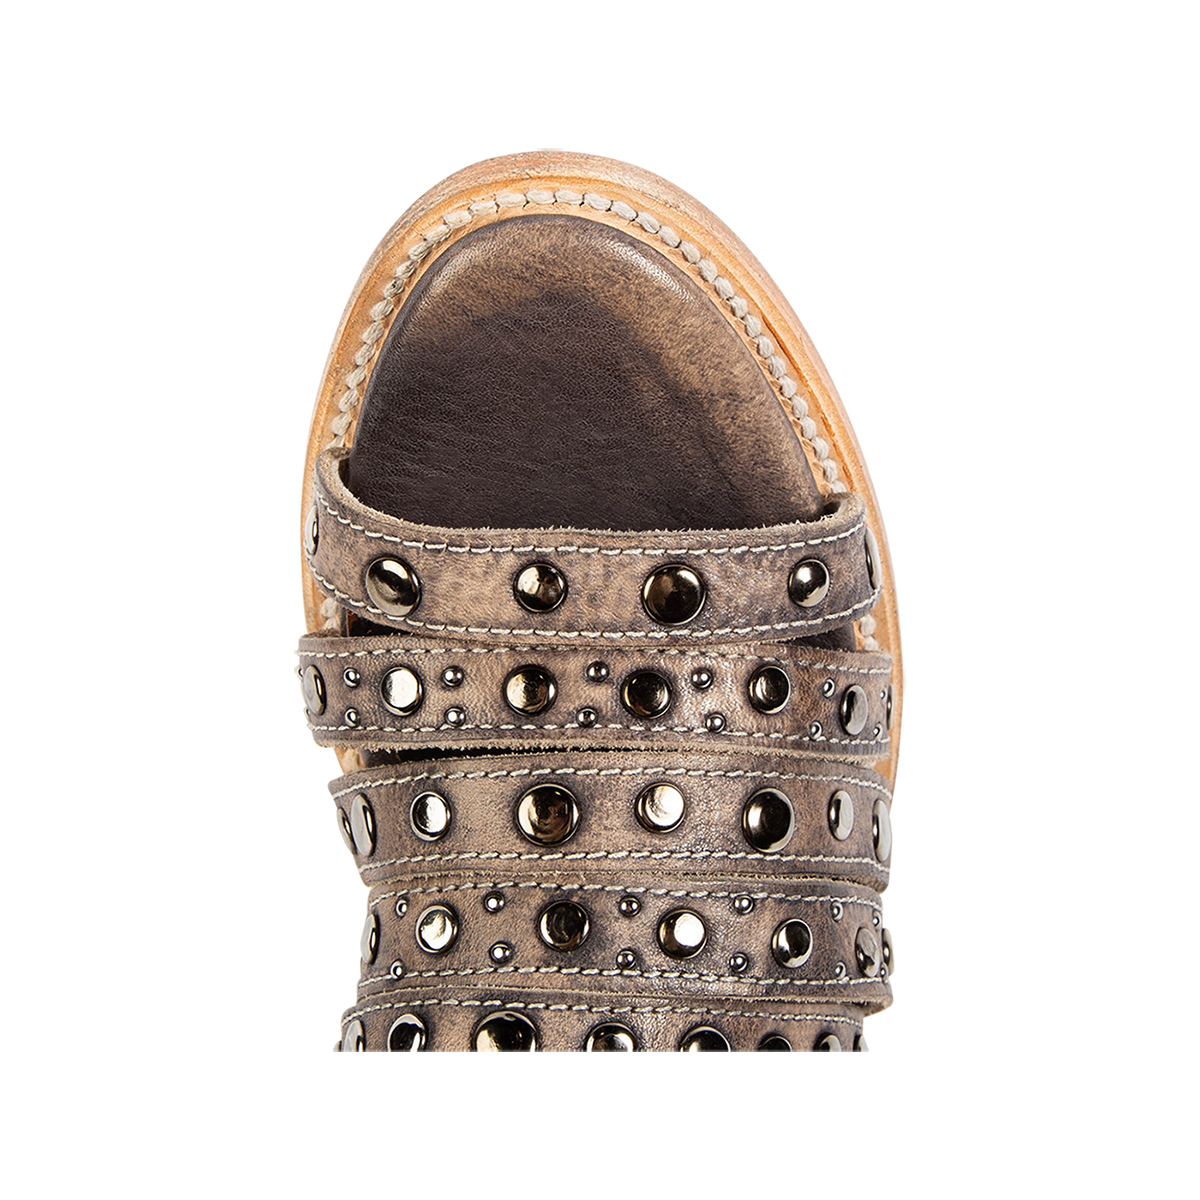 Top view showing open toe construction and embellished leather straps on FREEBIRD women's Cannes black distressed leather sandal